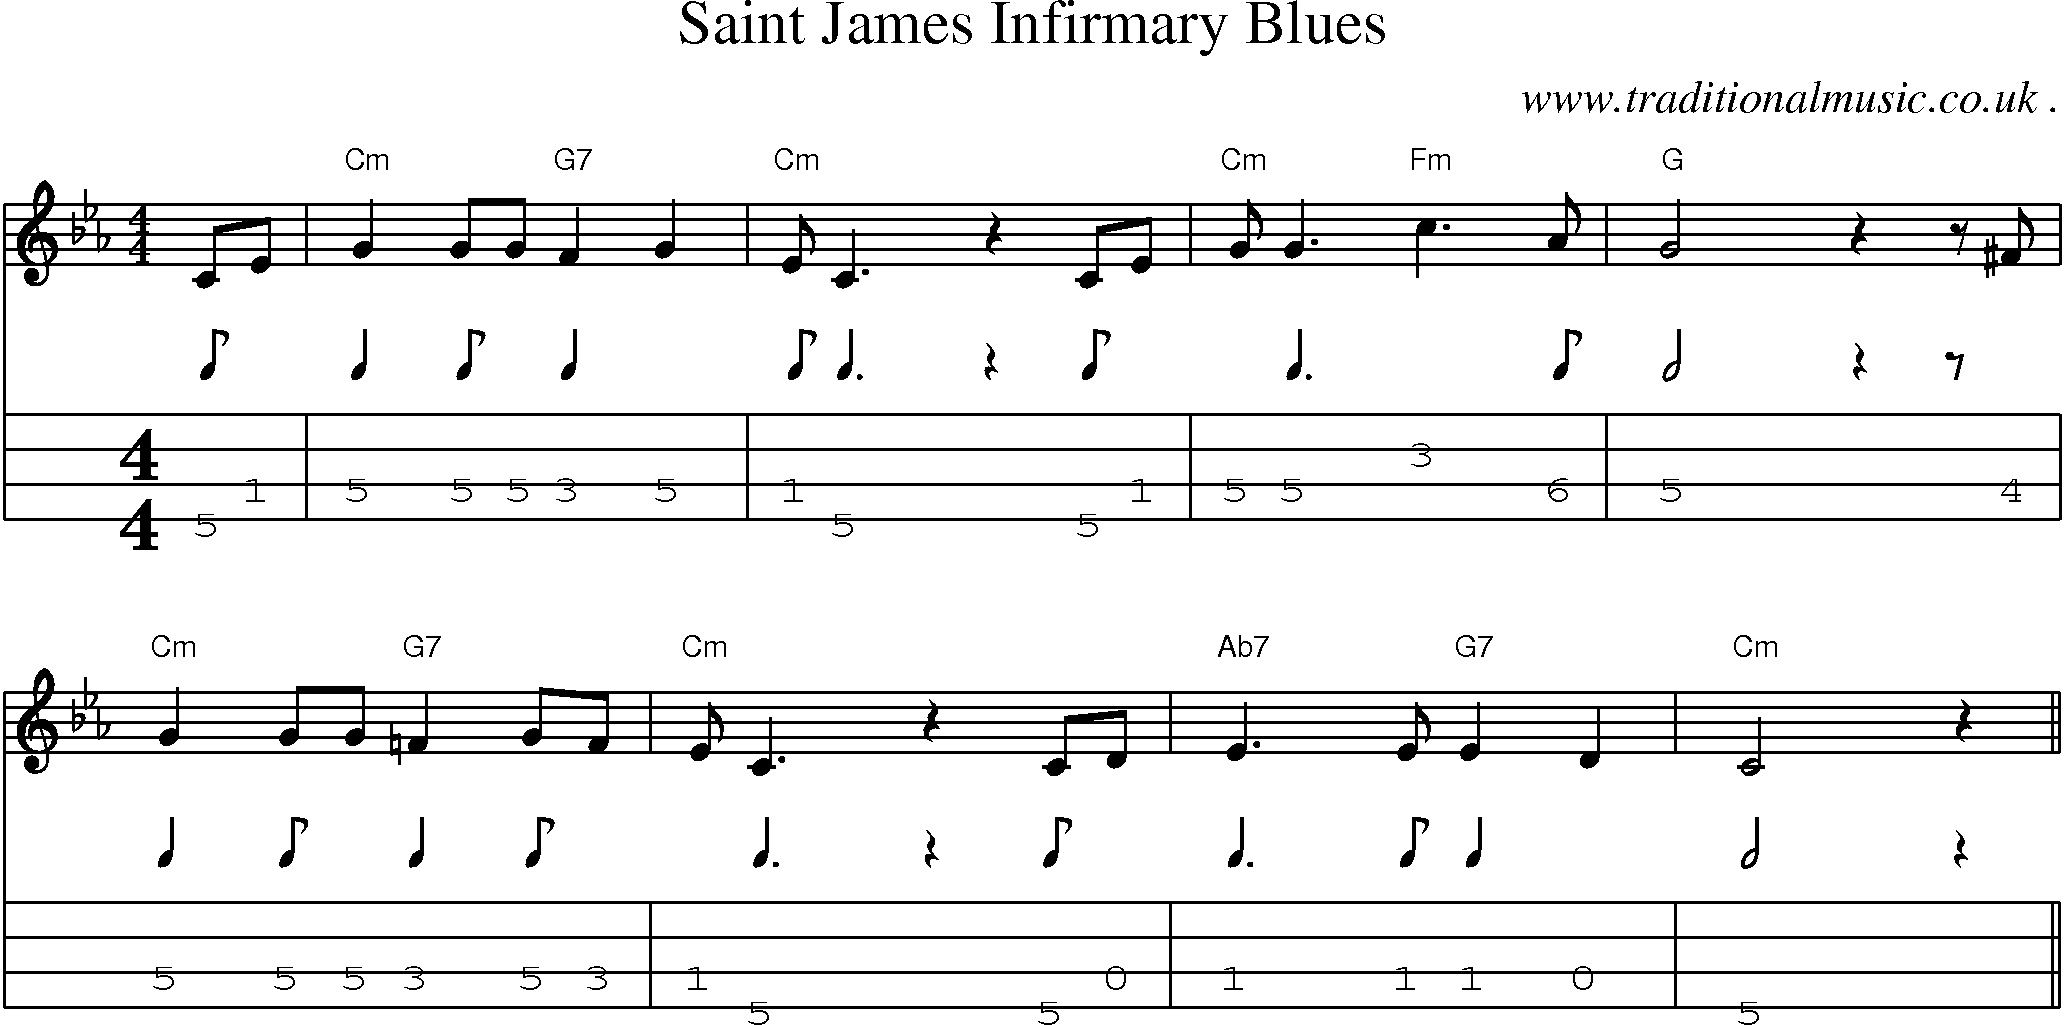 Music Score and Guitar Tabs for Saint James Infirmary Blues.